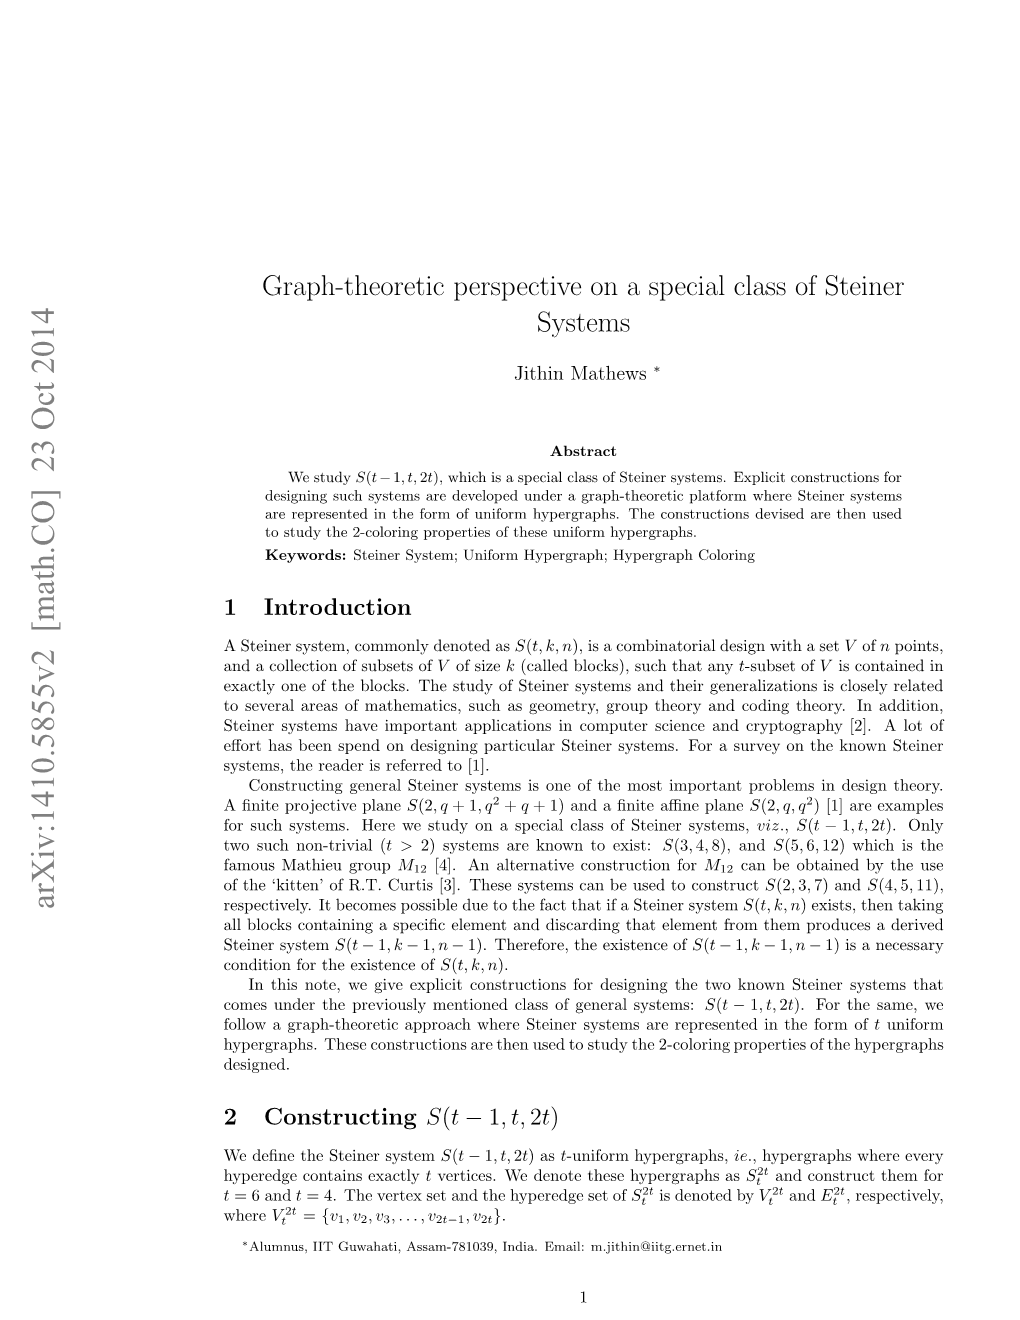 Graph-Theoretic Perspective on a Special Class of Steiner Systems